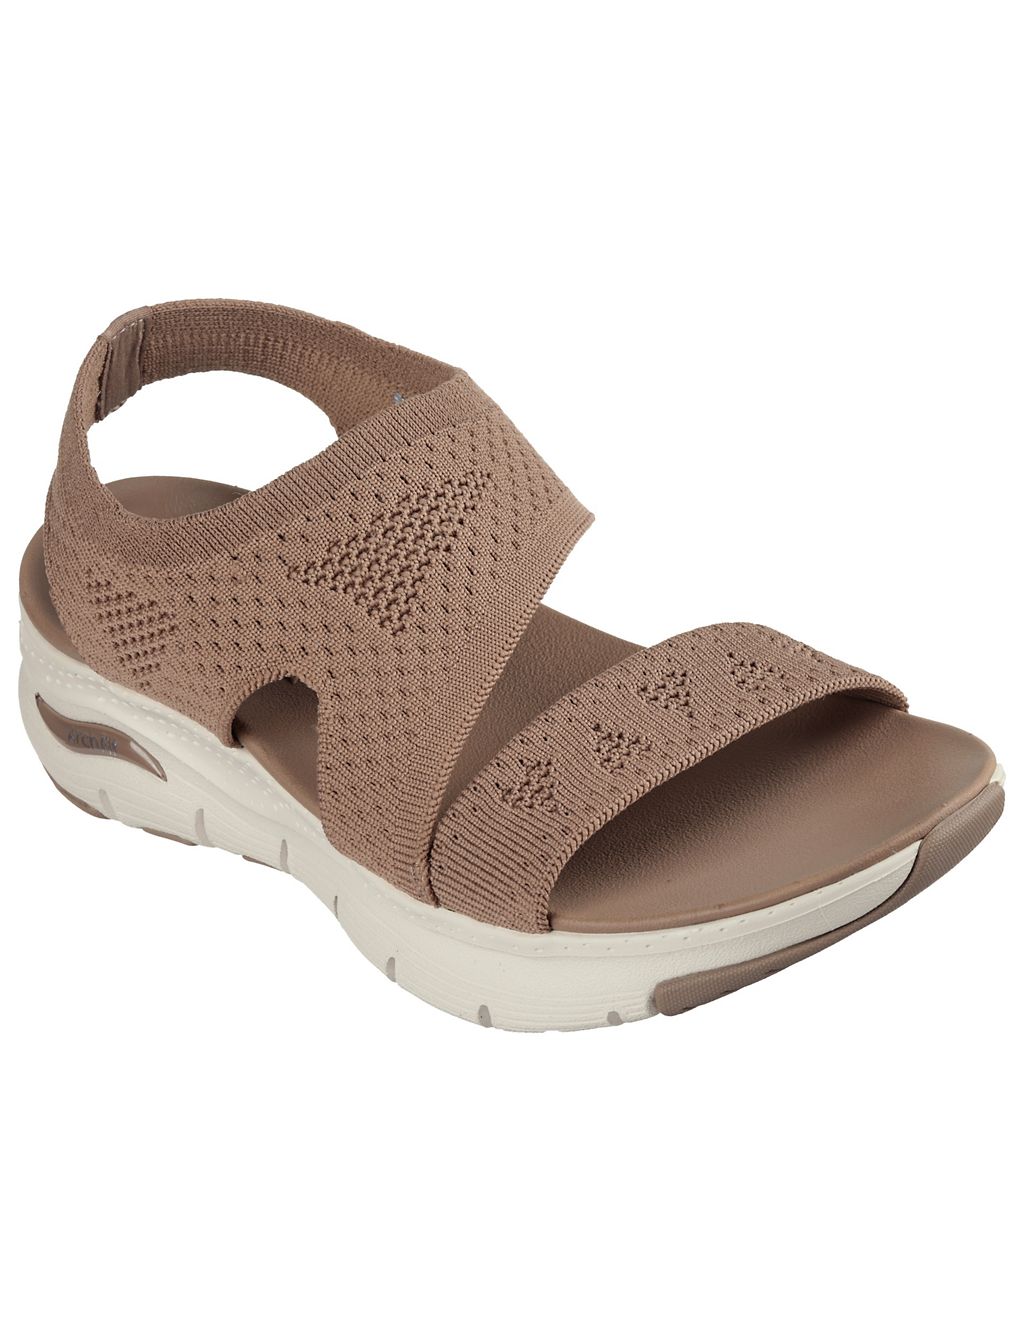 Arch Fit Brightest Day Sandals 1 of 4